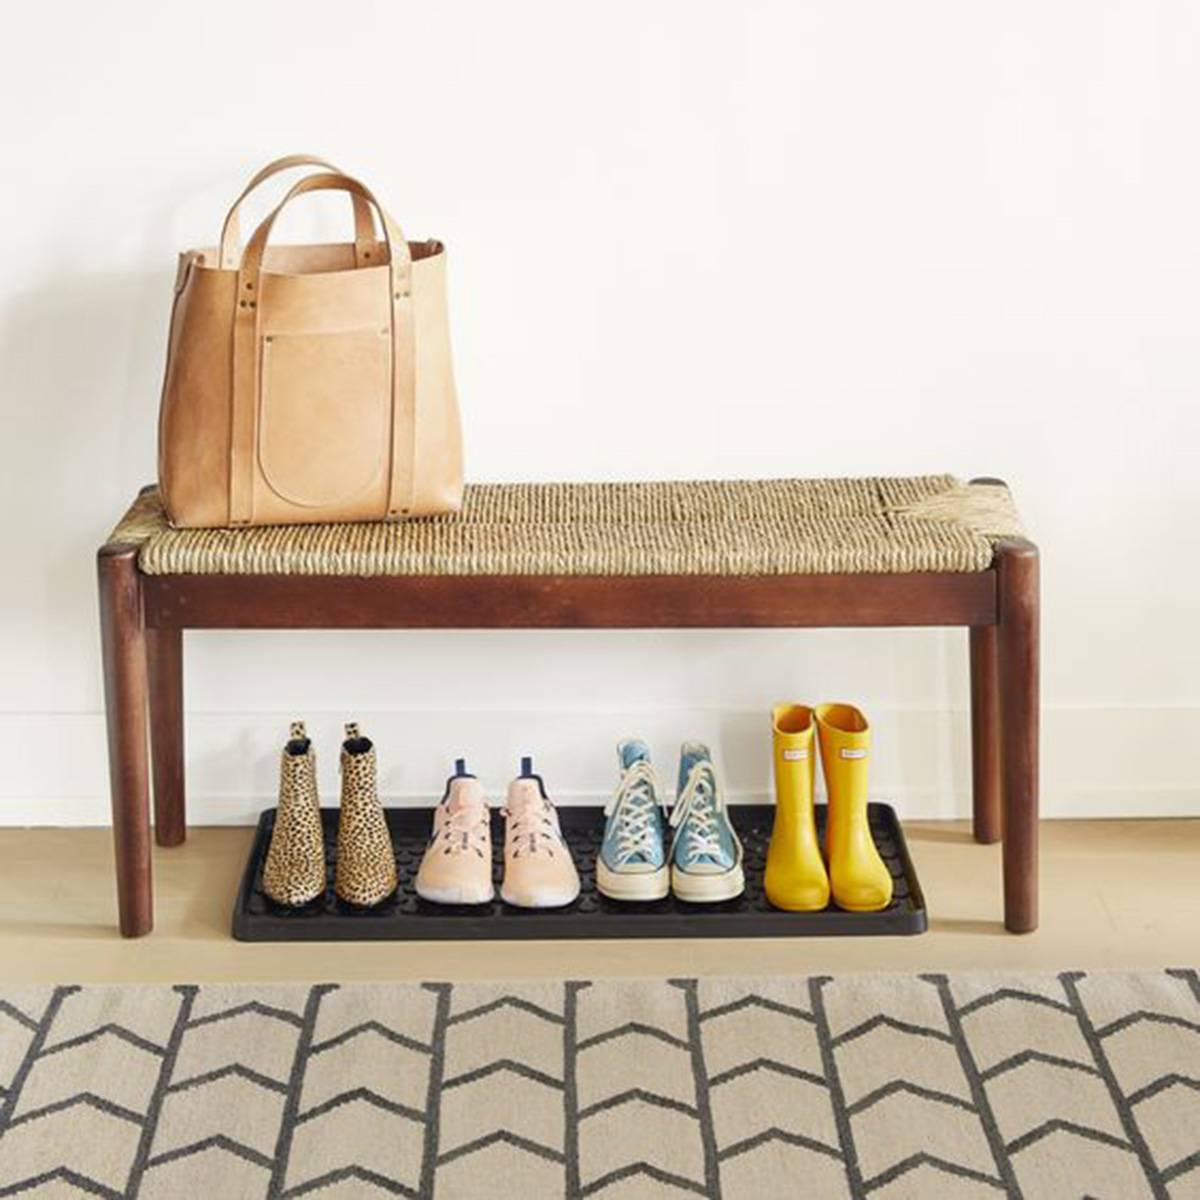 11 Shoe Storage Tips for Creating an Organized Entryway - Northern